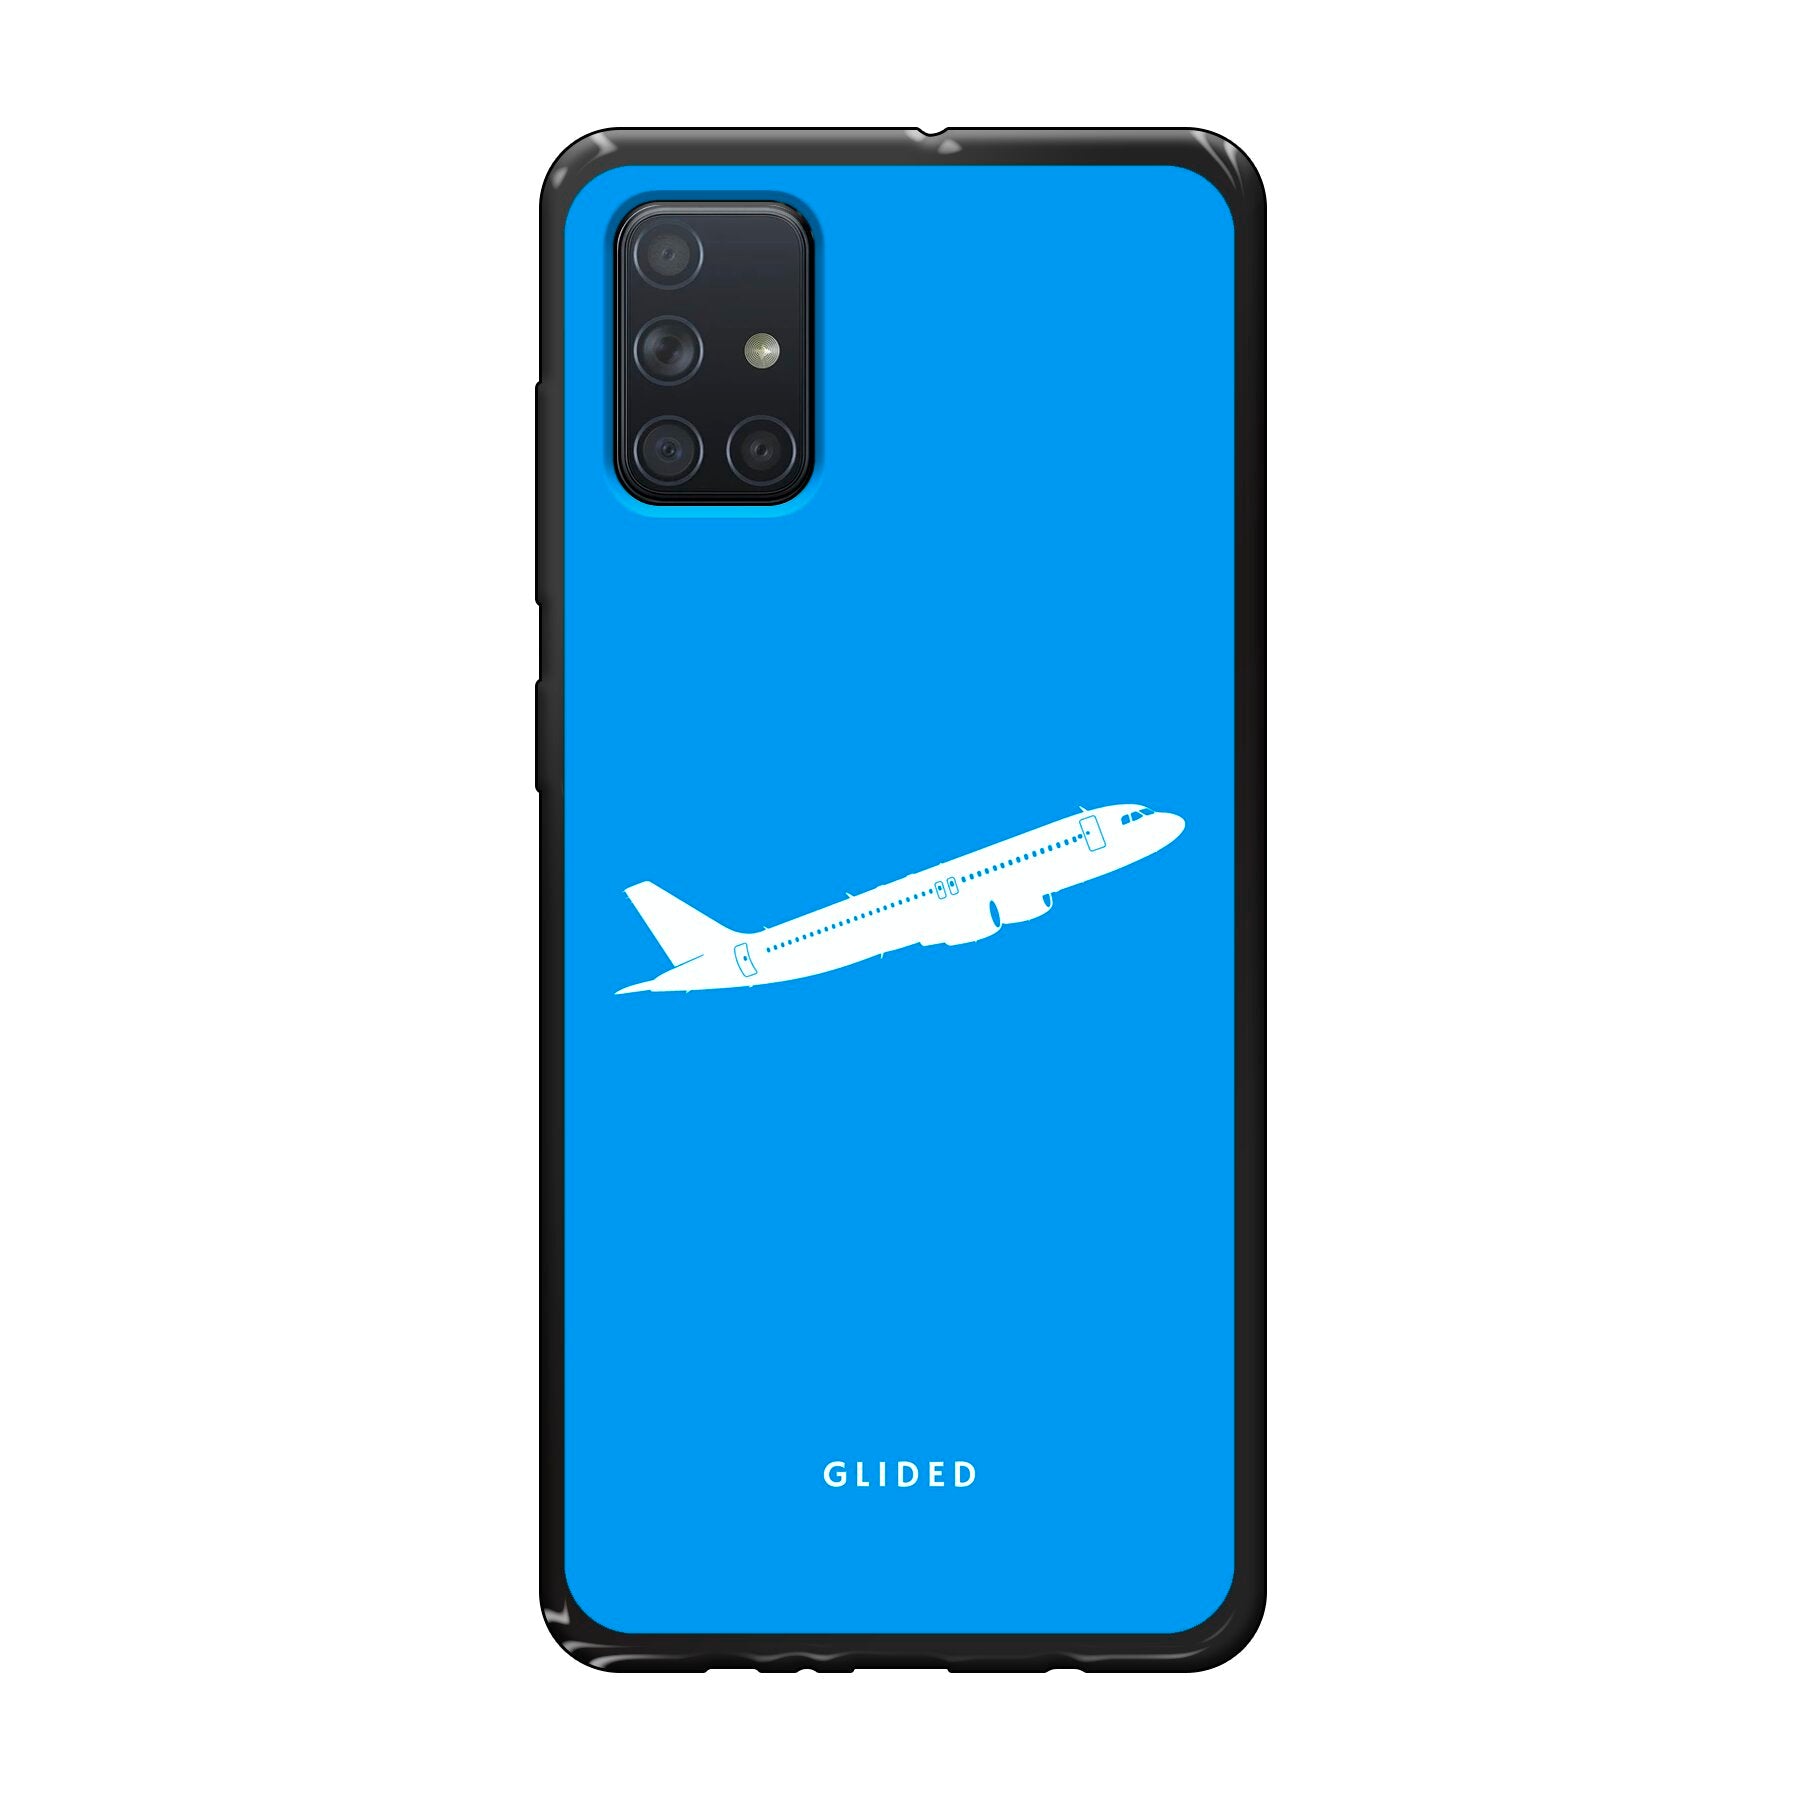 Up to Sky - Samsung Galaxy A71 Handyhülle Soft case